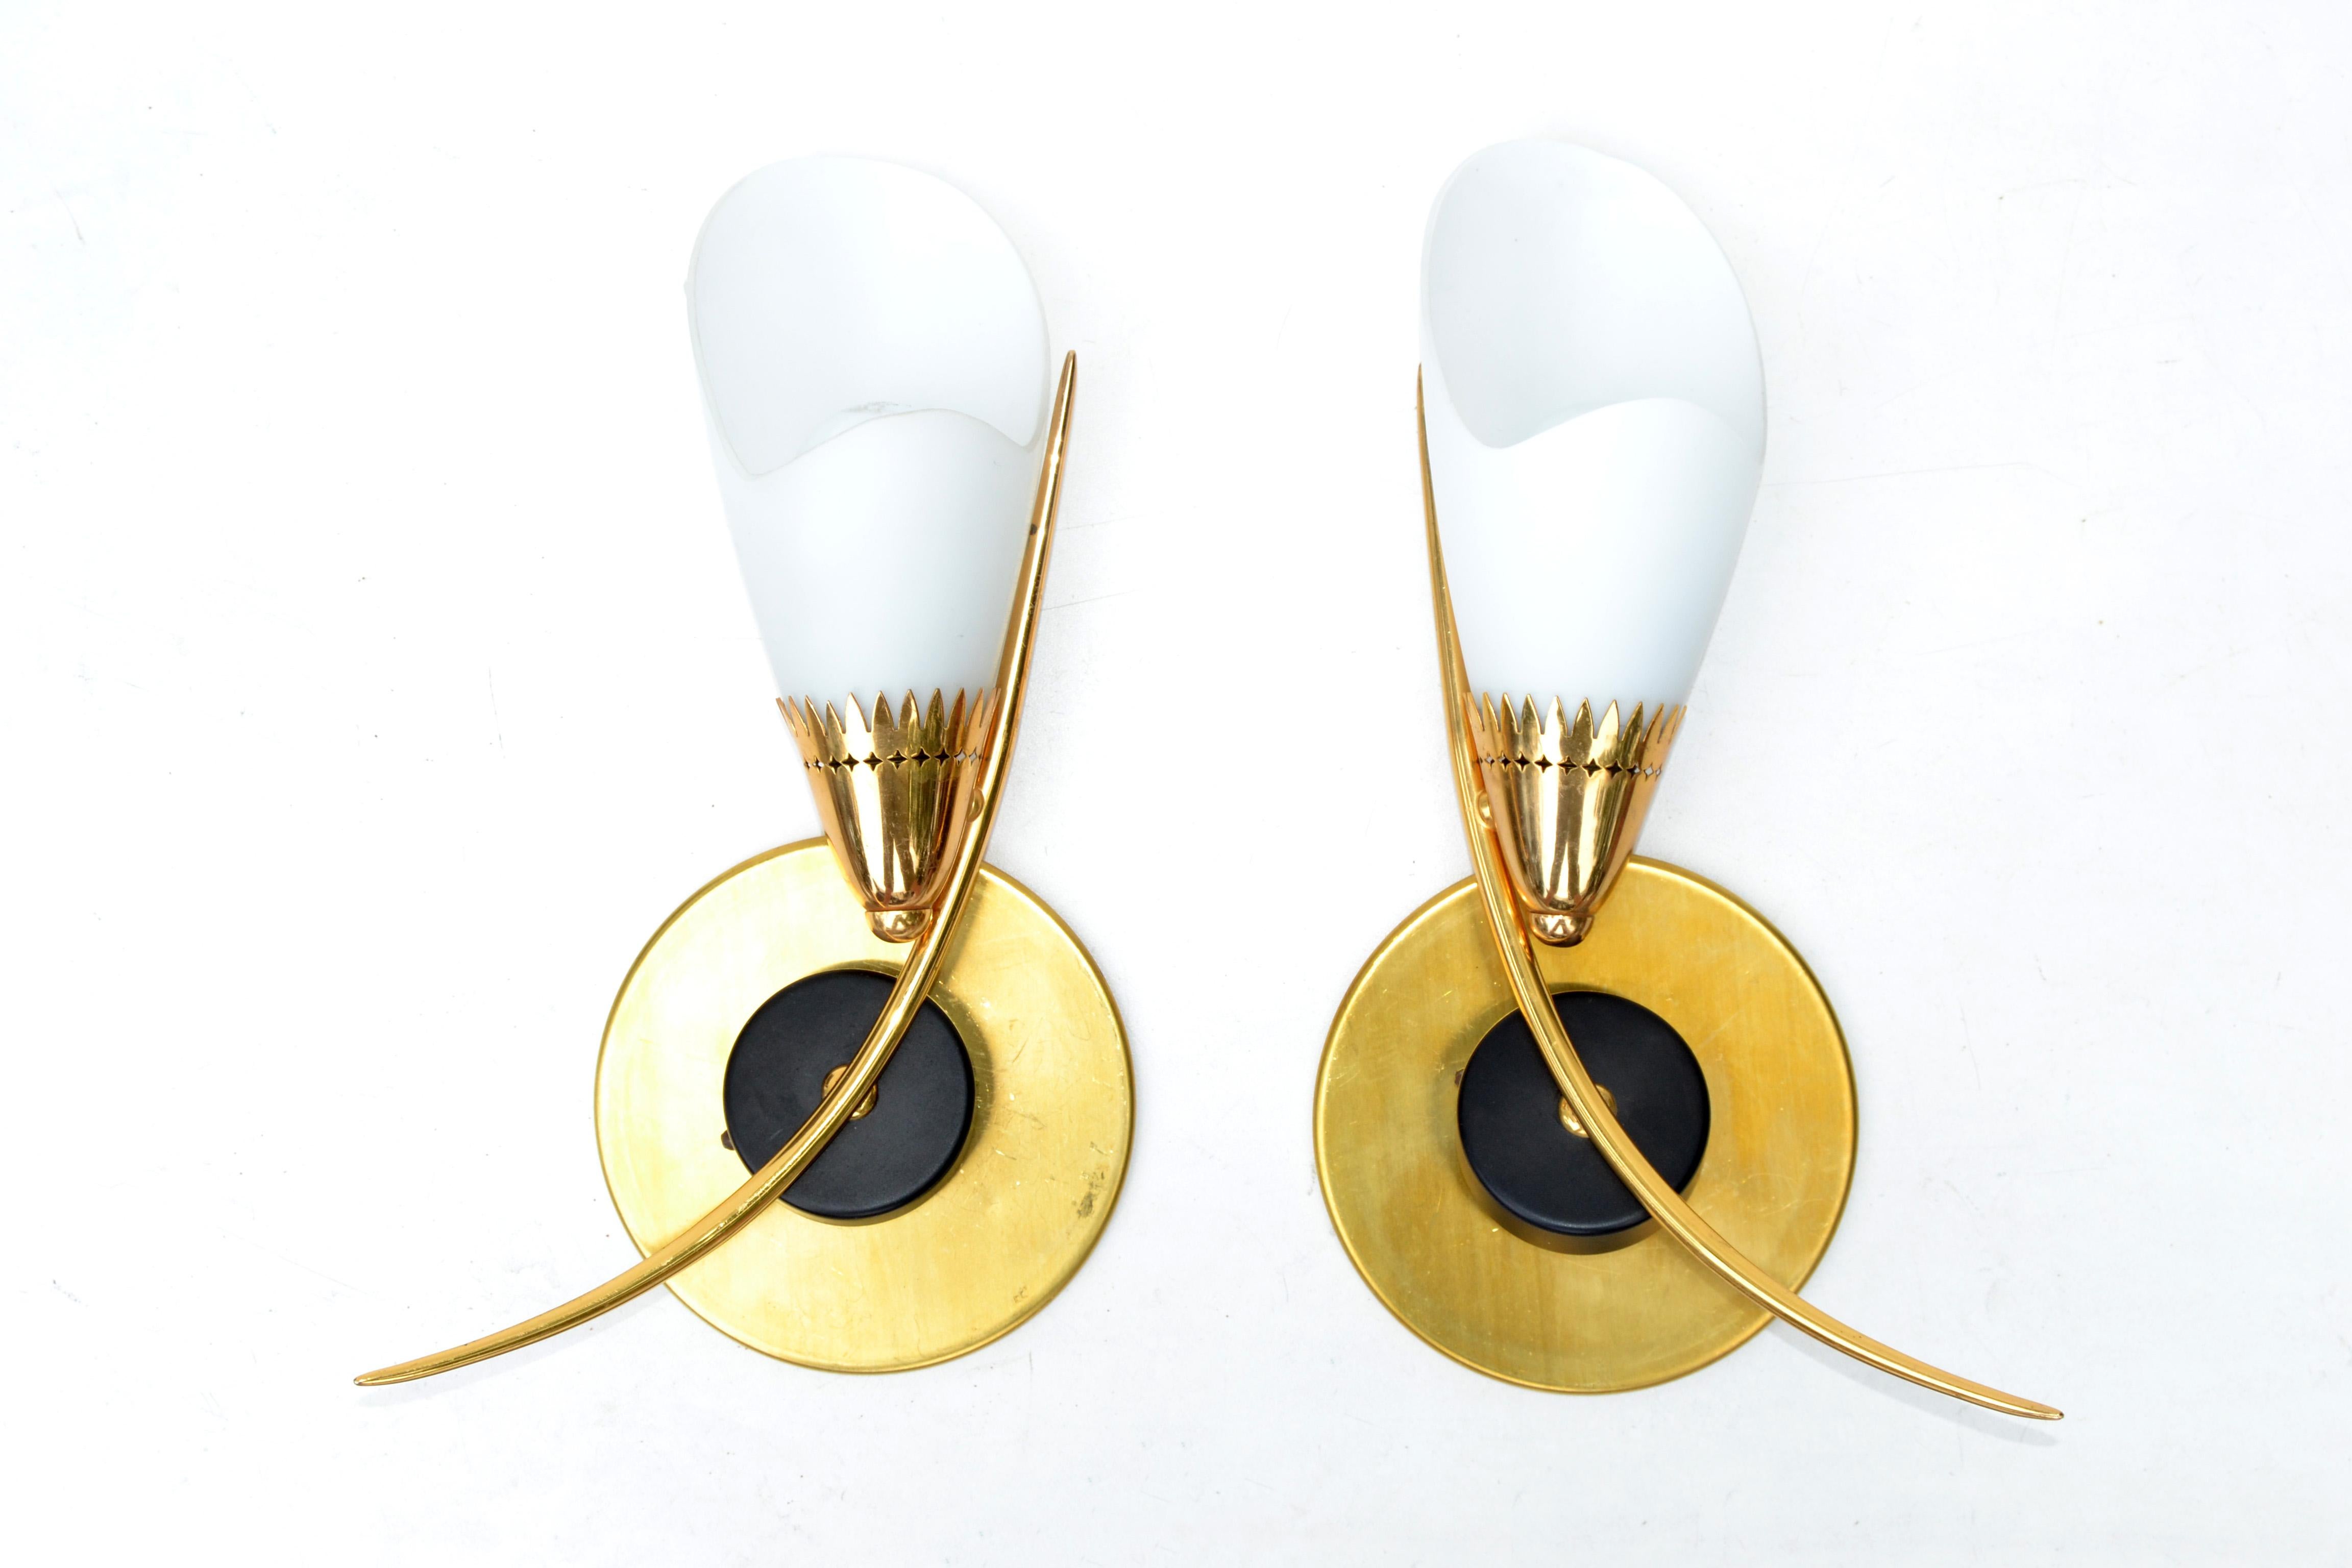 Maison Lunel Mirror Image Sconces Brass Steel & Opaline Shade France 1960, Pair For Sale 7